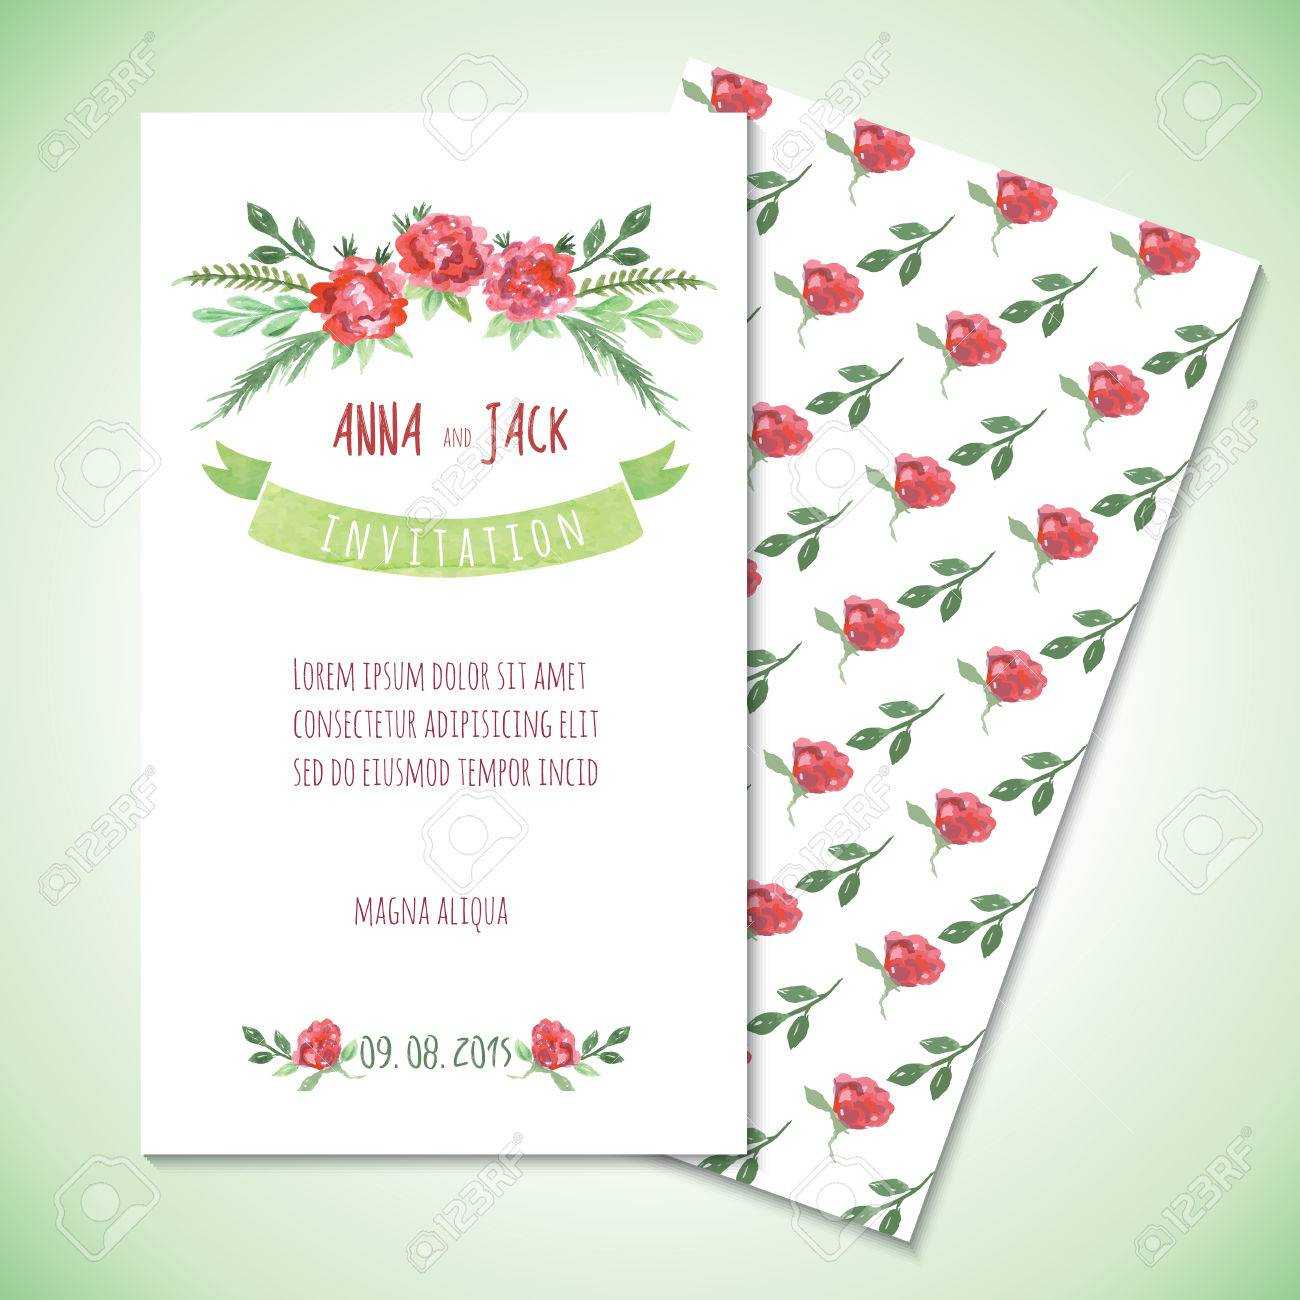 Watercolor Card Templates For Wedding Invitation, Save The Date Cards,  Mothers Day, Valentines Day, Birthday Cards With Flowers And Ribbon And With Regard To Save The Date Cards Templates